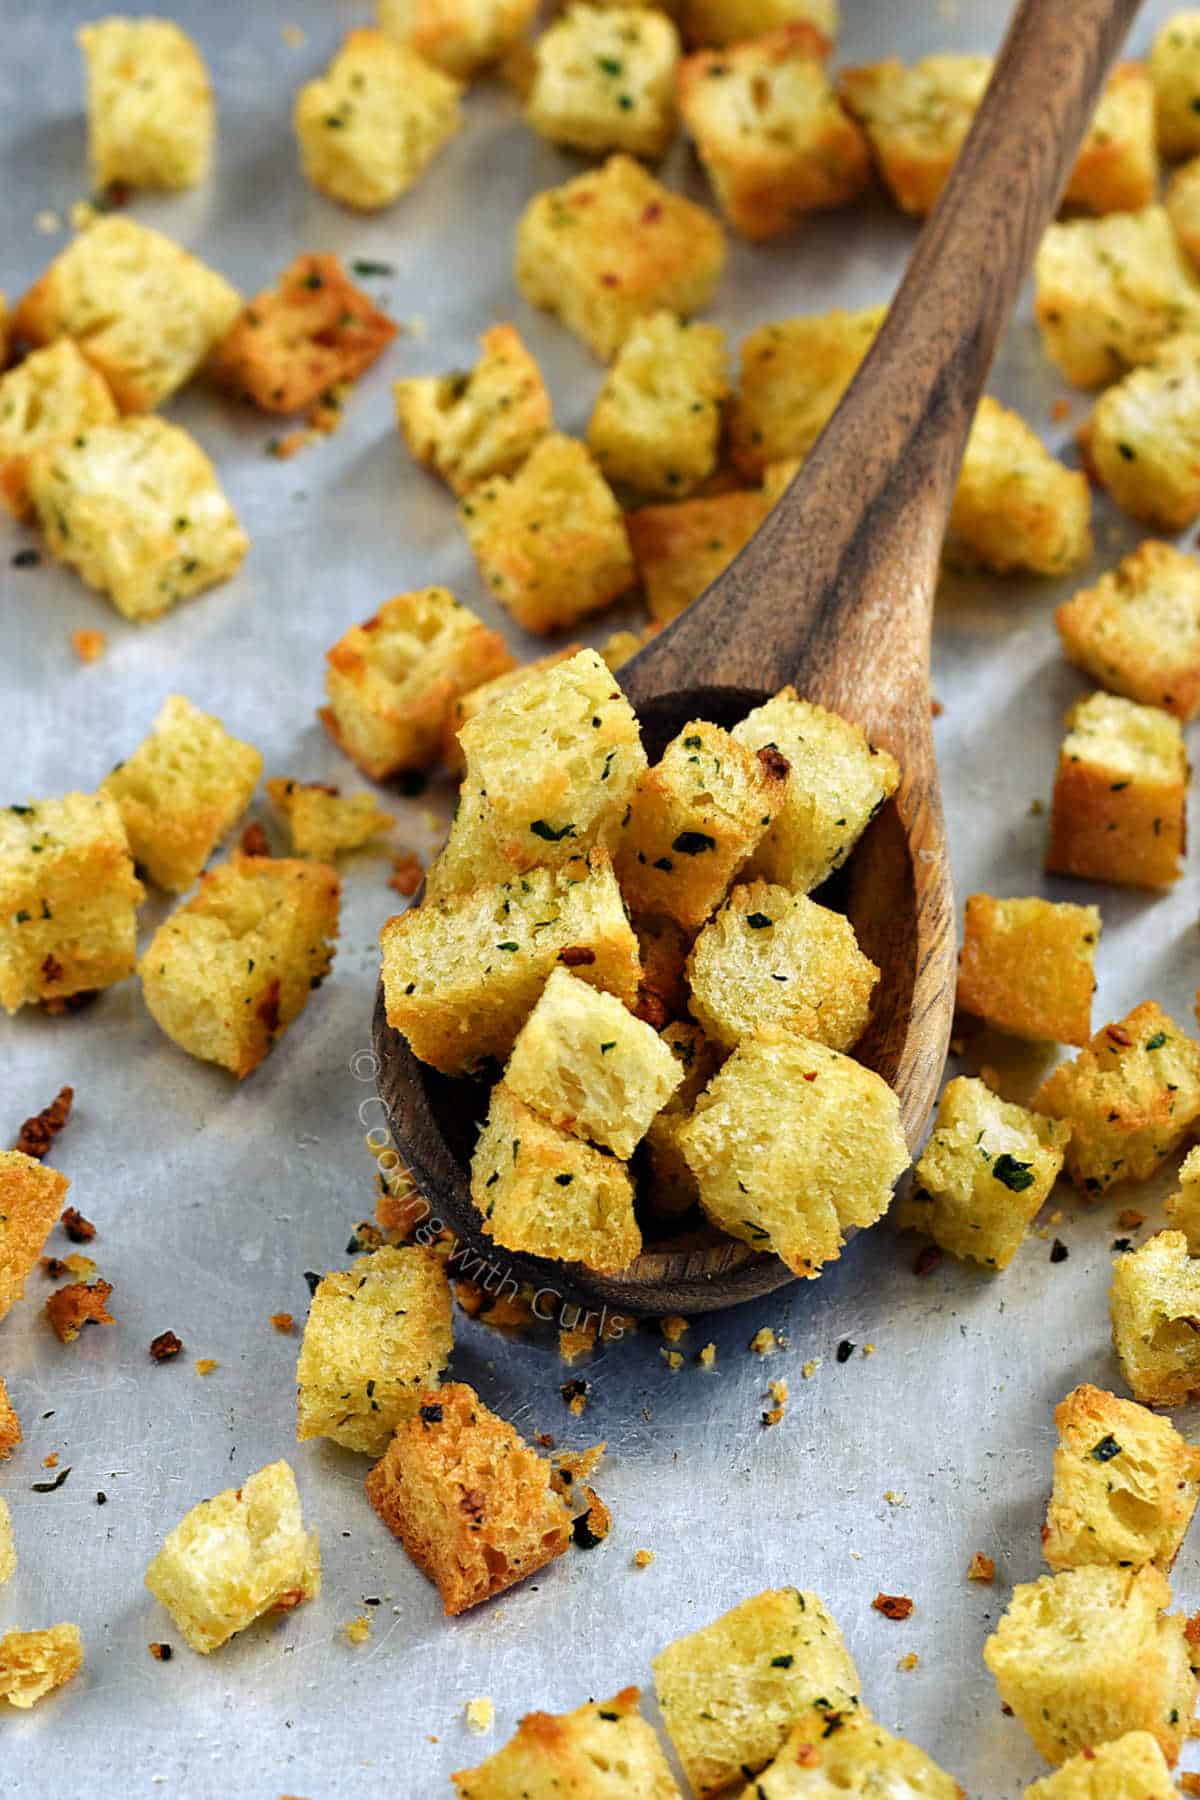 Homemade-crunchy-garlic-croutons-in-a-wood-spoon-on-a-baking-sheet.